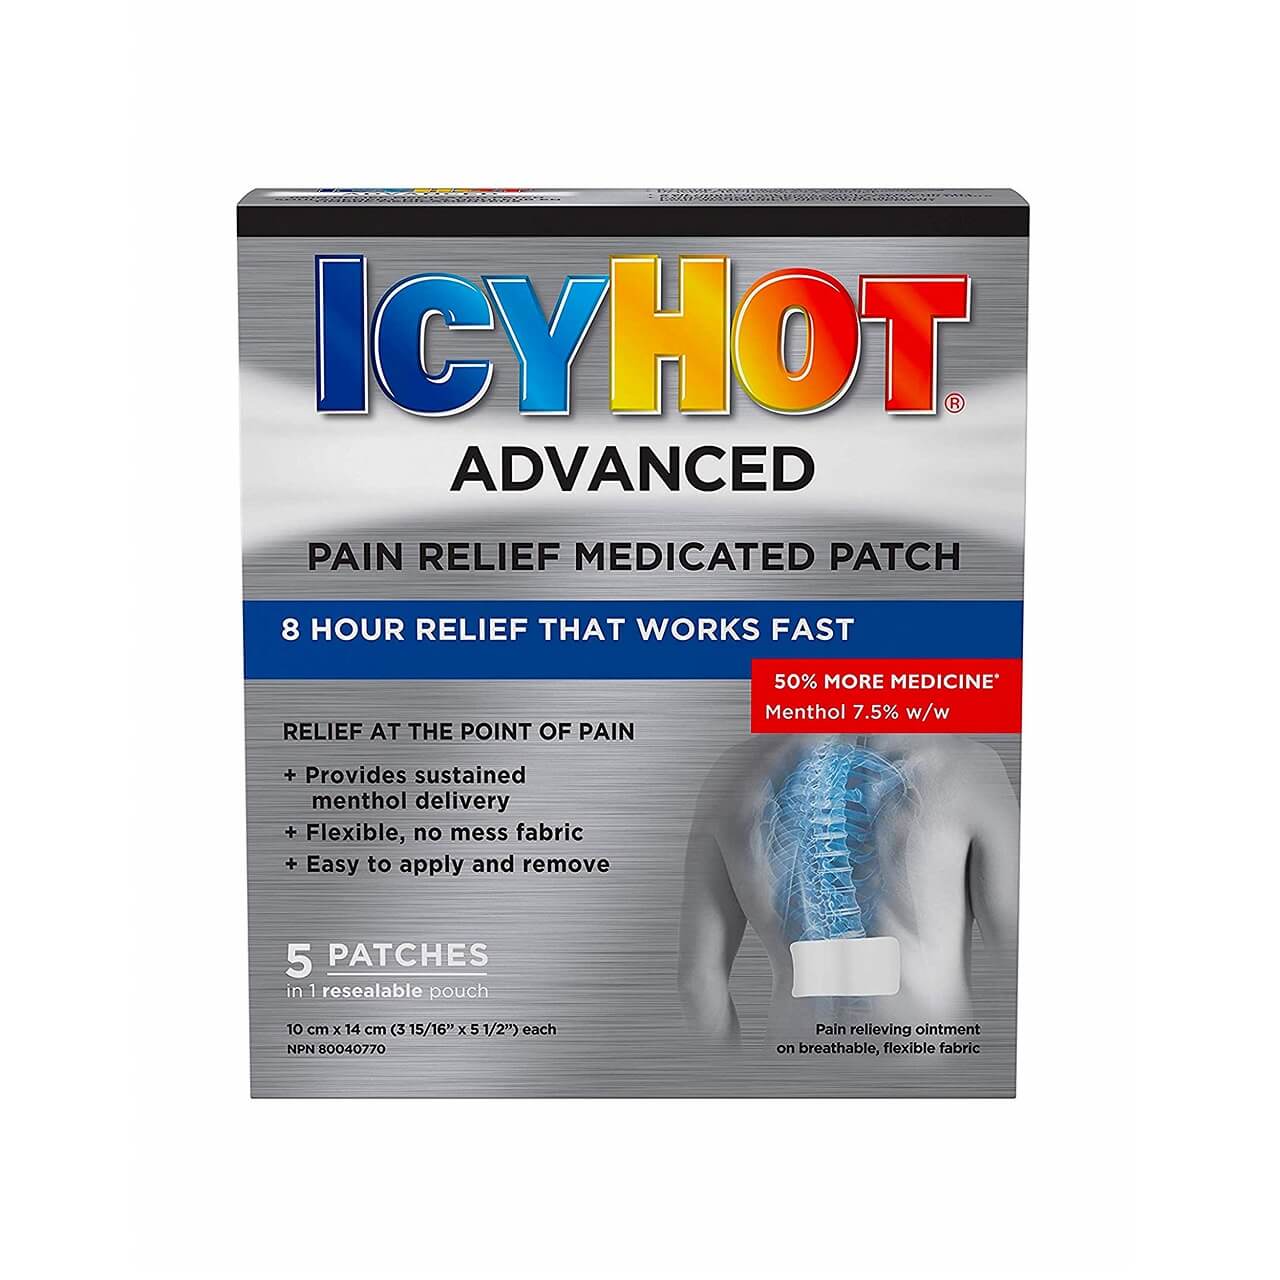 Product label for Icy Hot Advanced Medicated Pain Relief Medicated Patches (5 patches)